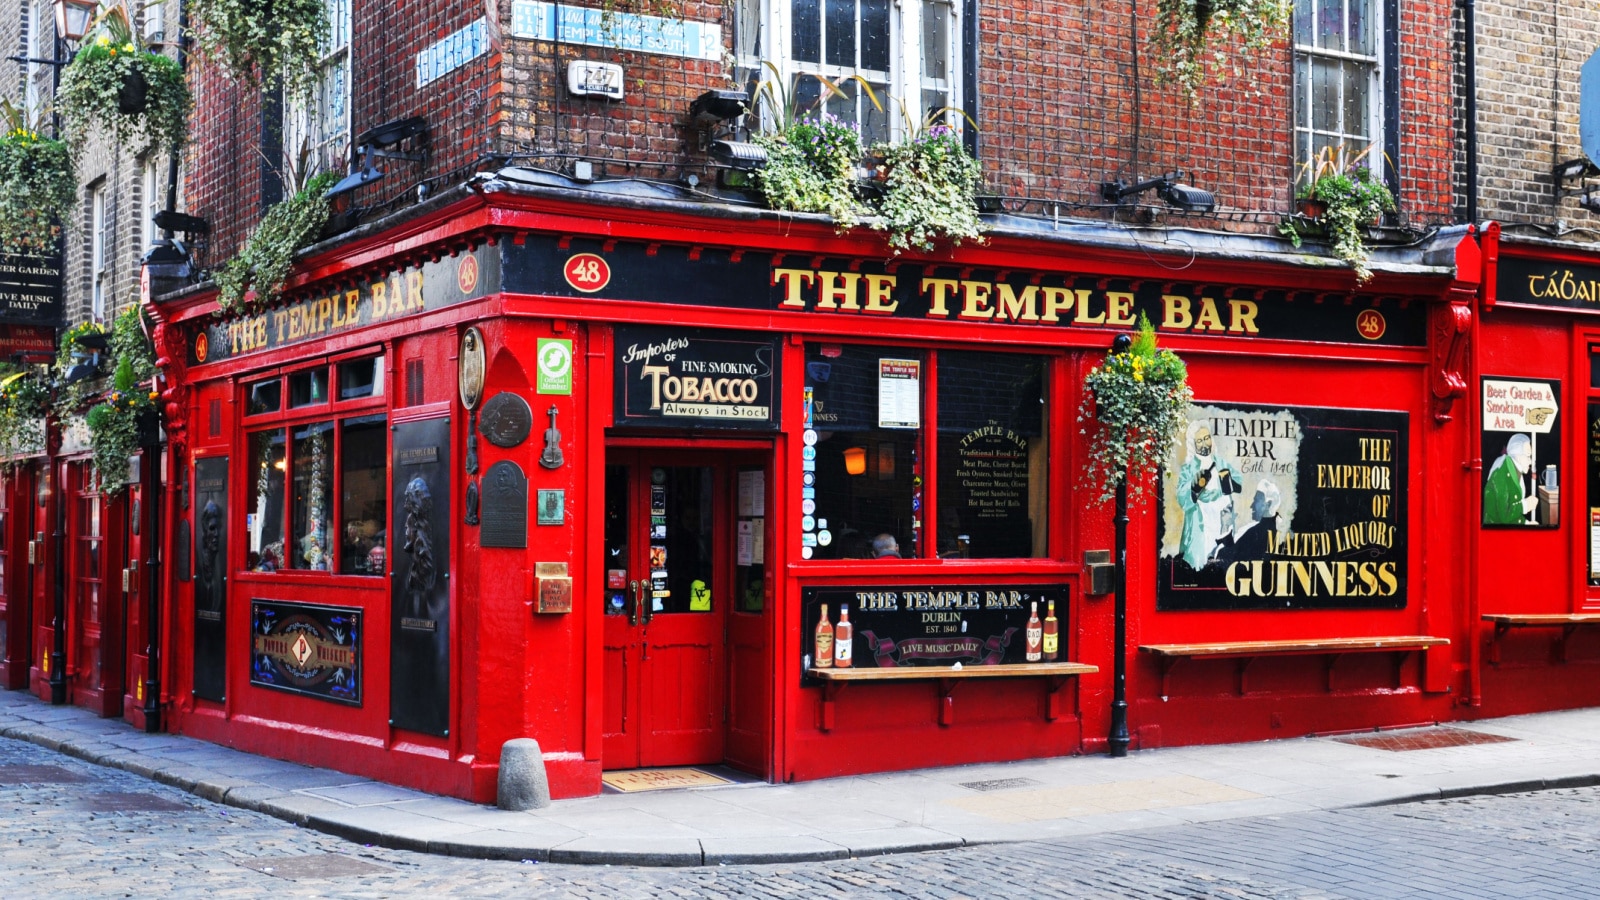 DUBLIN, IRELAND - MARCH 30, 2013: Temple Bar is a famous landmark in Dublins cultural quarter visited by thousands of tourists every year.